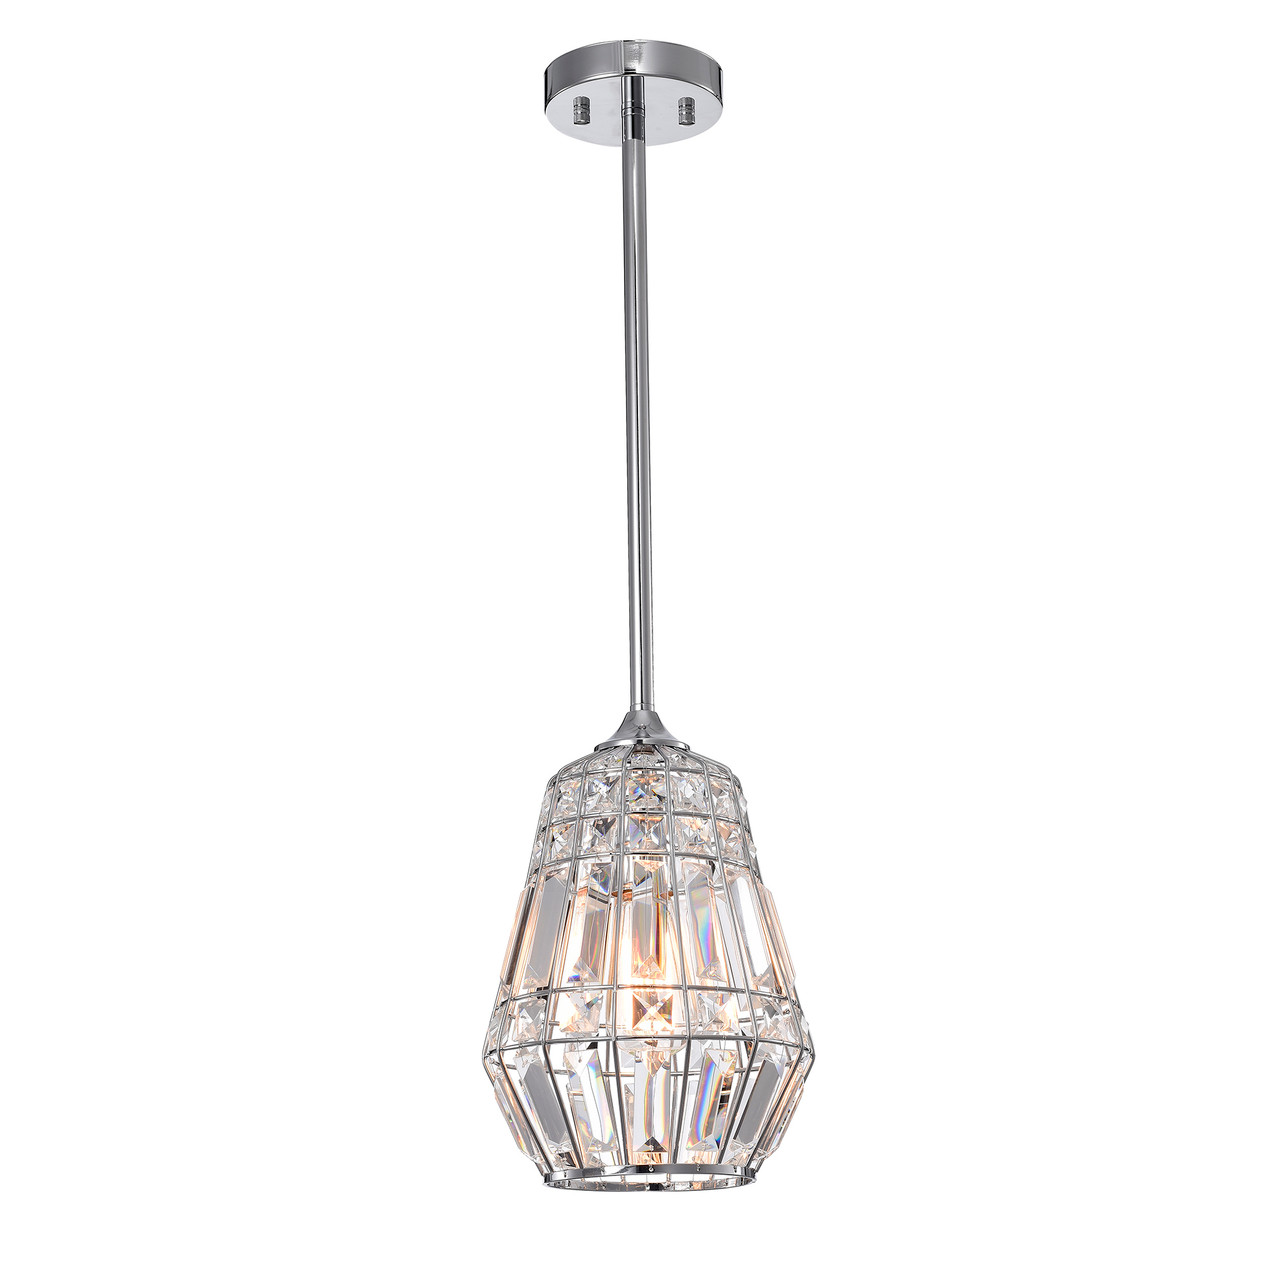 WAREHOUSE OF TIFFANY'S HM115/1 Trazi 8.3 in. 1-Light Indoor Chrome Finish Pendant Lamp with Light Kit